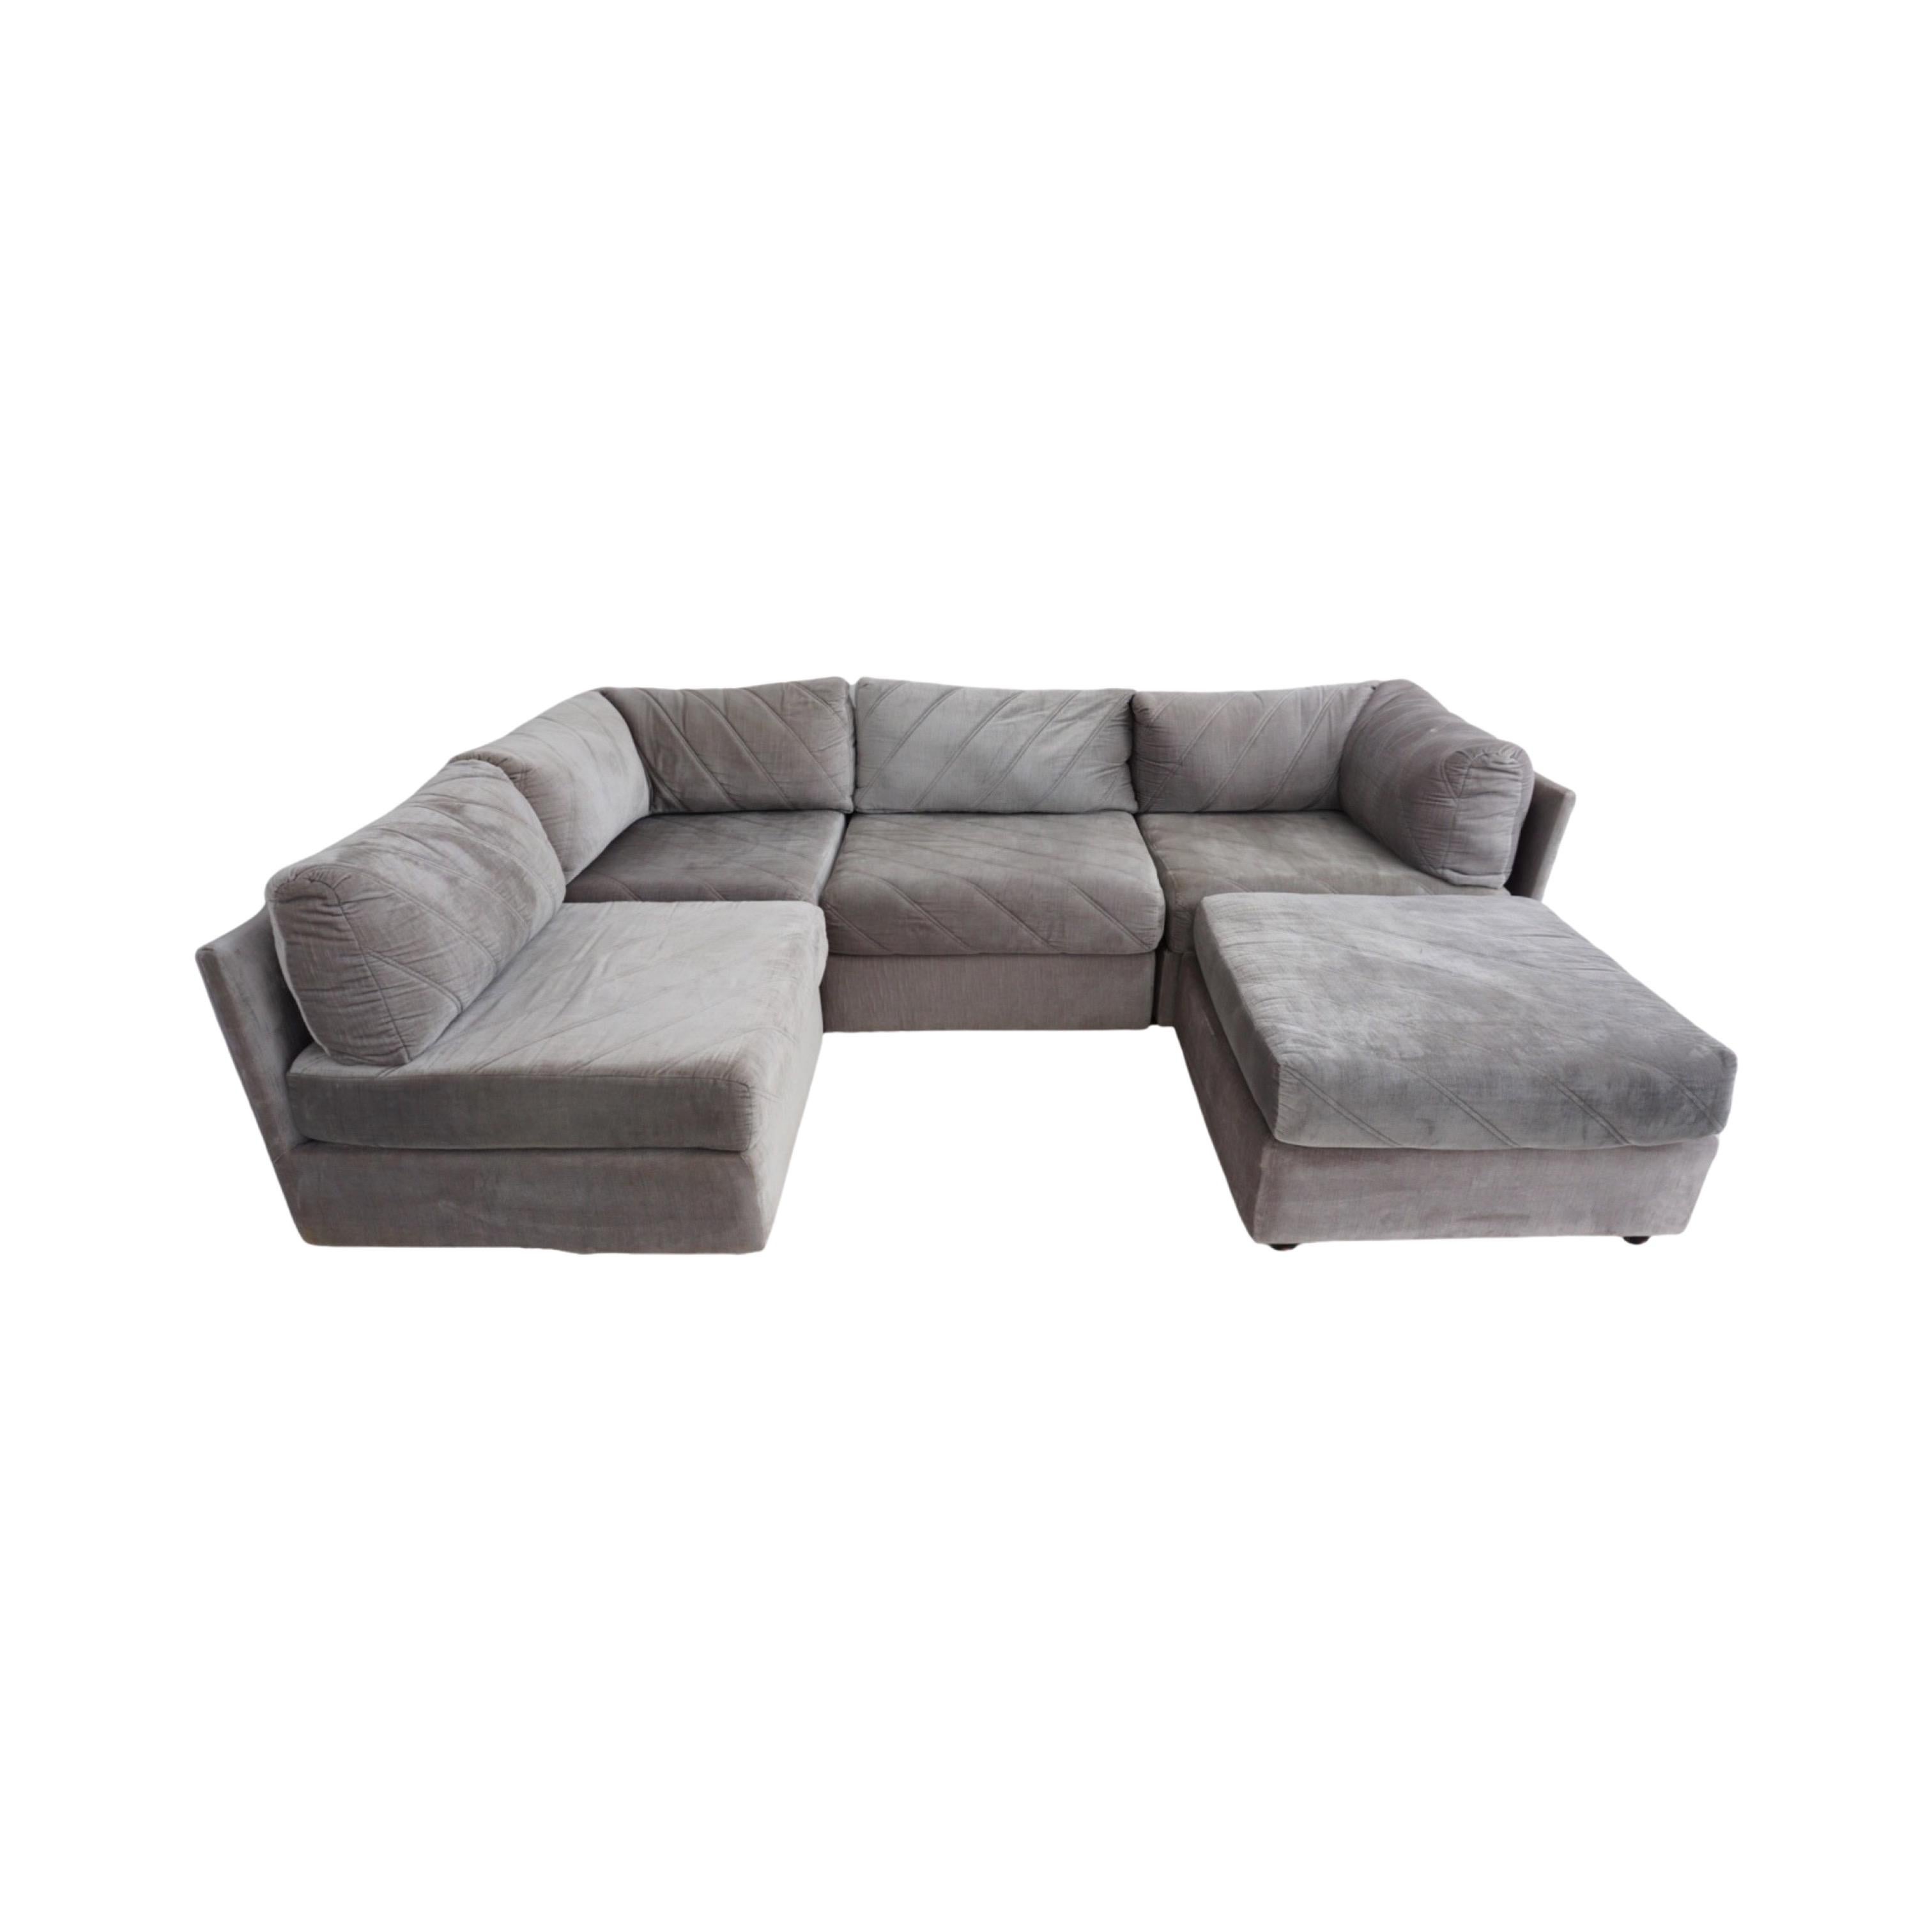 Today is your lucky day. You can finally fulfill your wildest 1980s conversation pit dreams. Whether lounging in luxury or entertaining in style, this sectional seamlessly adapts to your space, offering multiple configurations for every occasion.